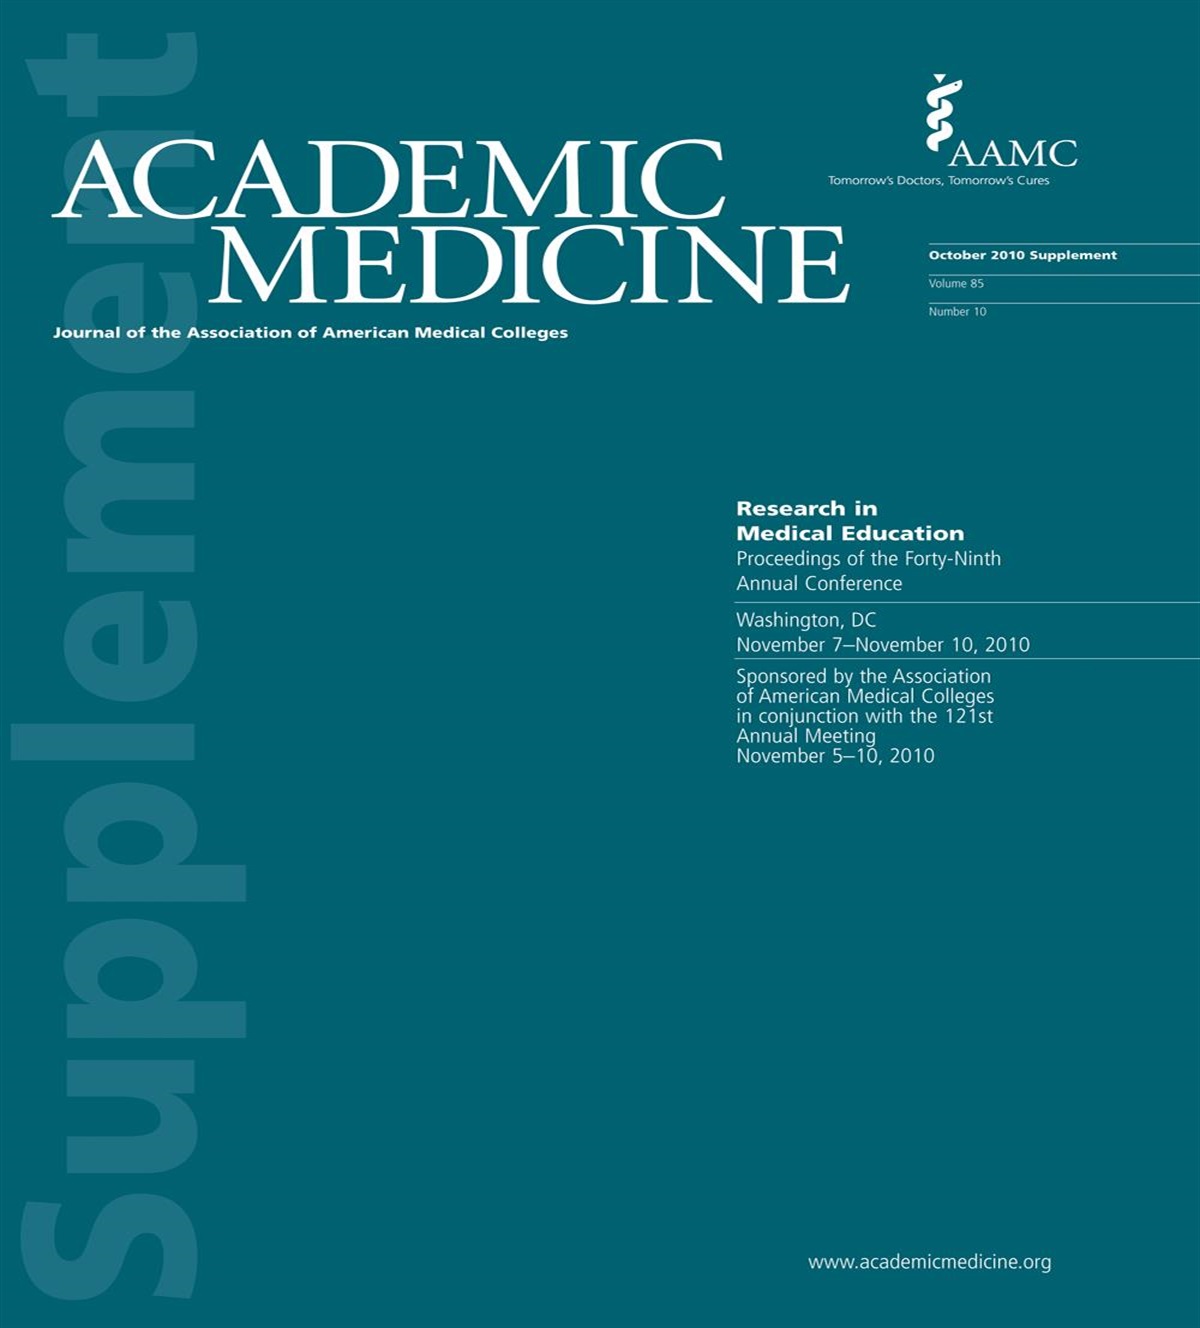 It's Your Own Risk: Medical Students' Perspectives on Online Professionalism